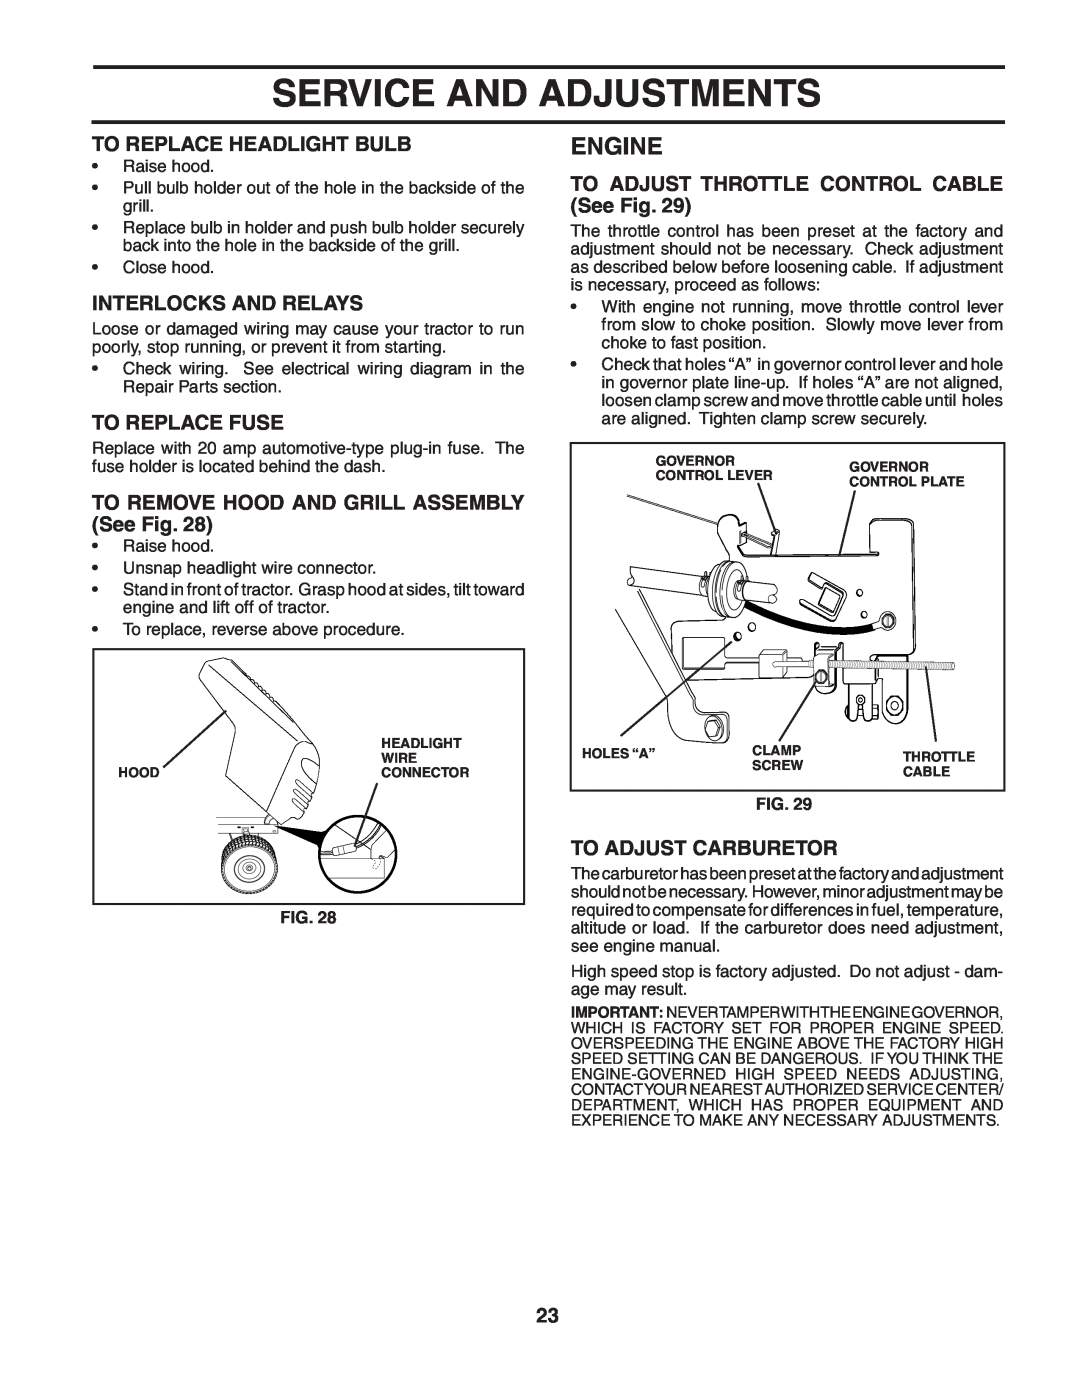 Poulan PO1742STA manual To Replace Headlight Bulb, Interlocks And Relays, To Replace Fuse, To Adjust Carburetor, Engine 